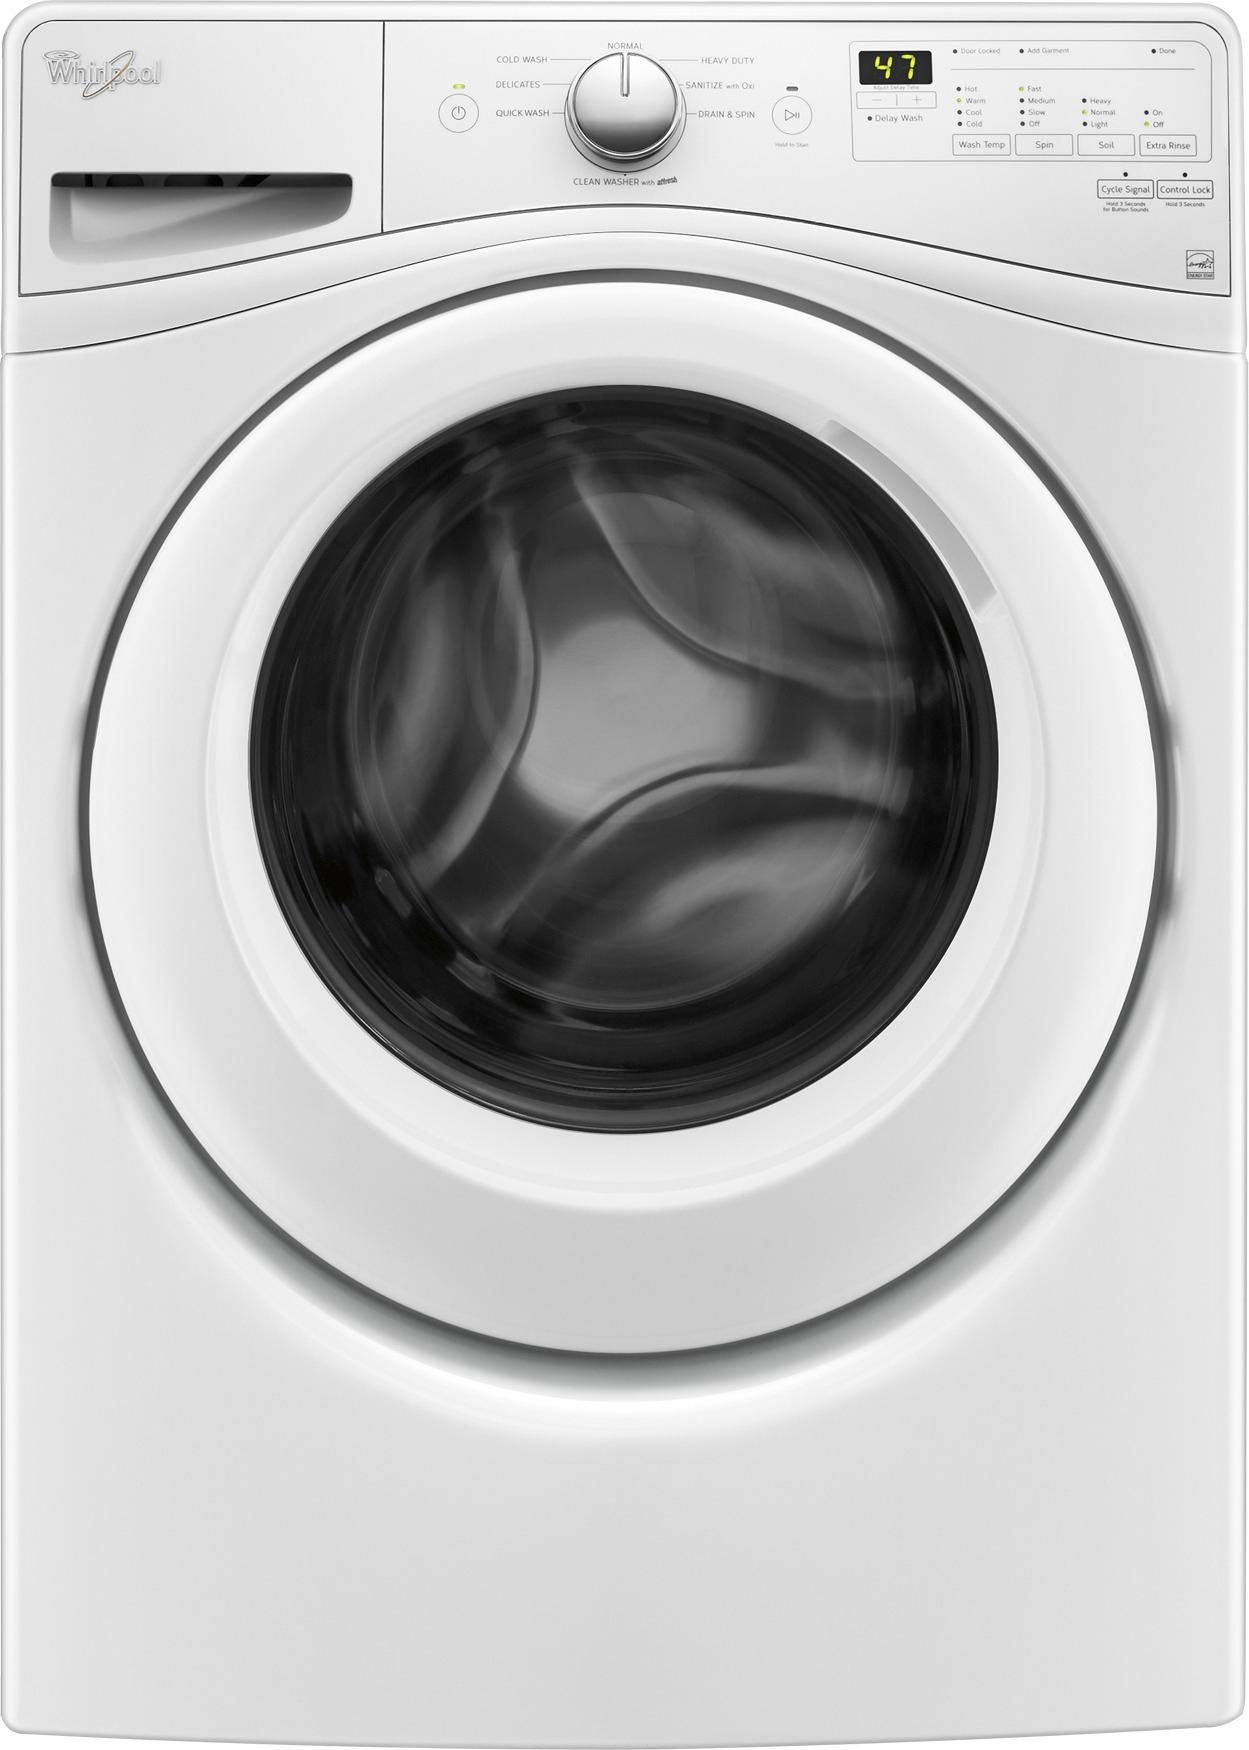 How do you know what setting to wash your clothes on the front loader washers?